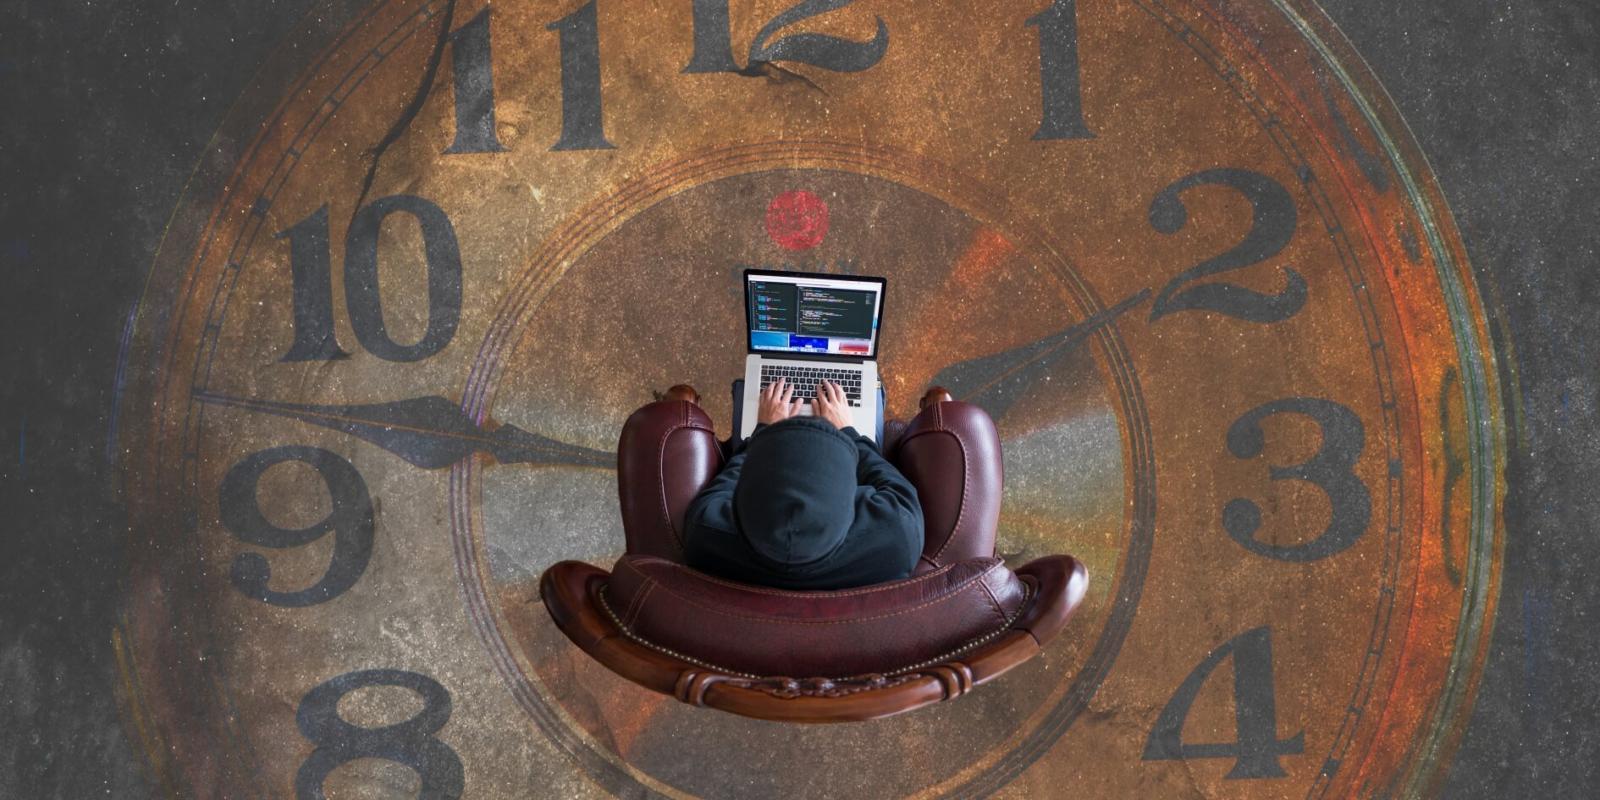 Best Time Management Tools for Small Business